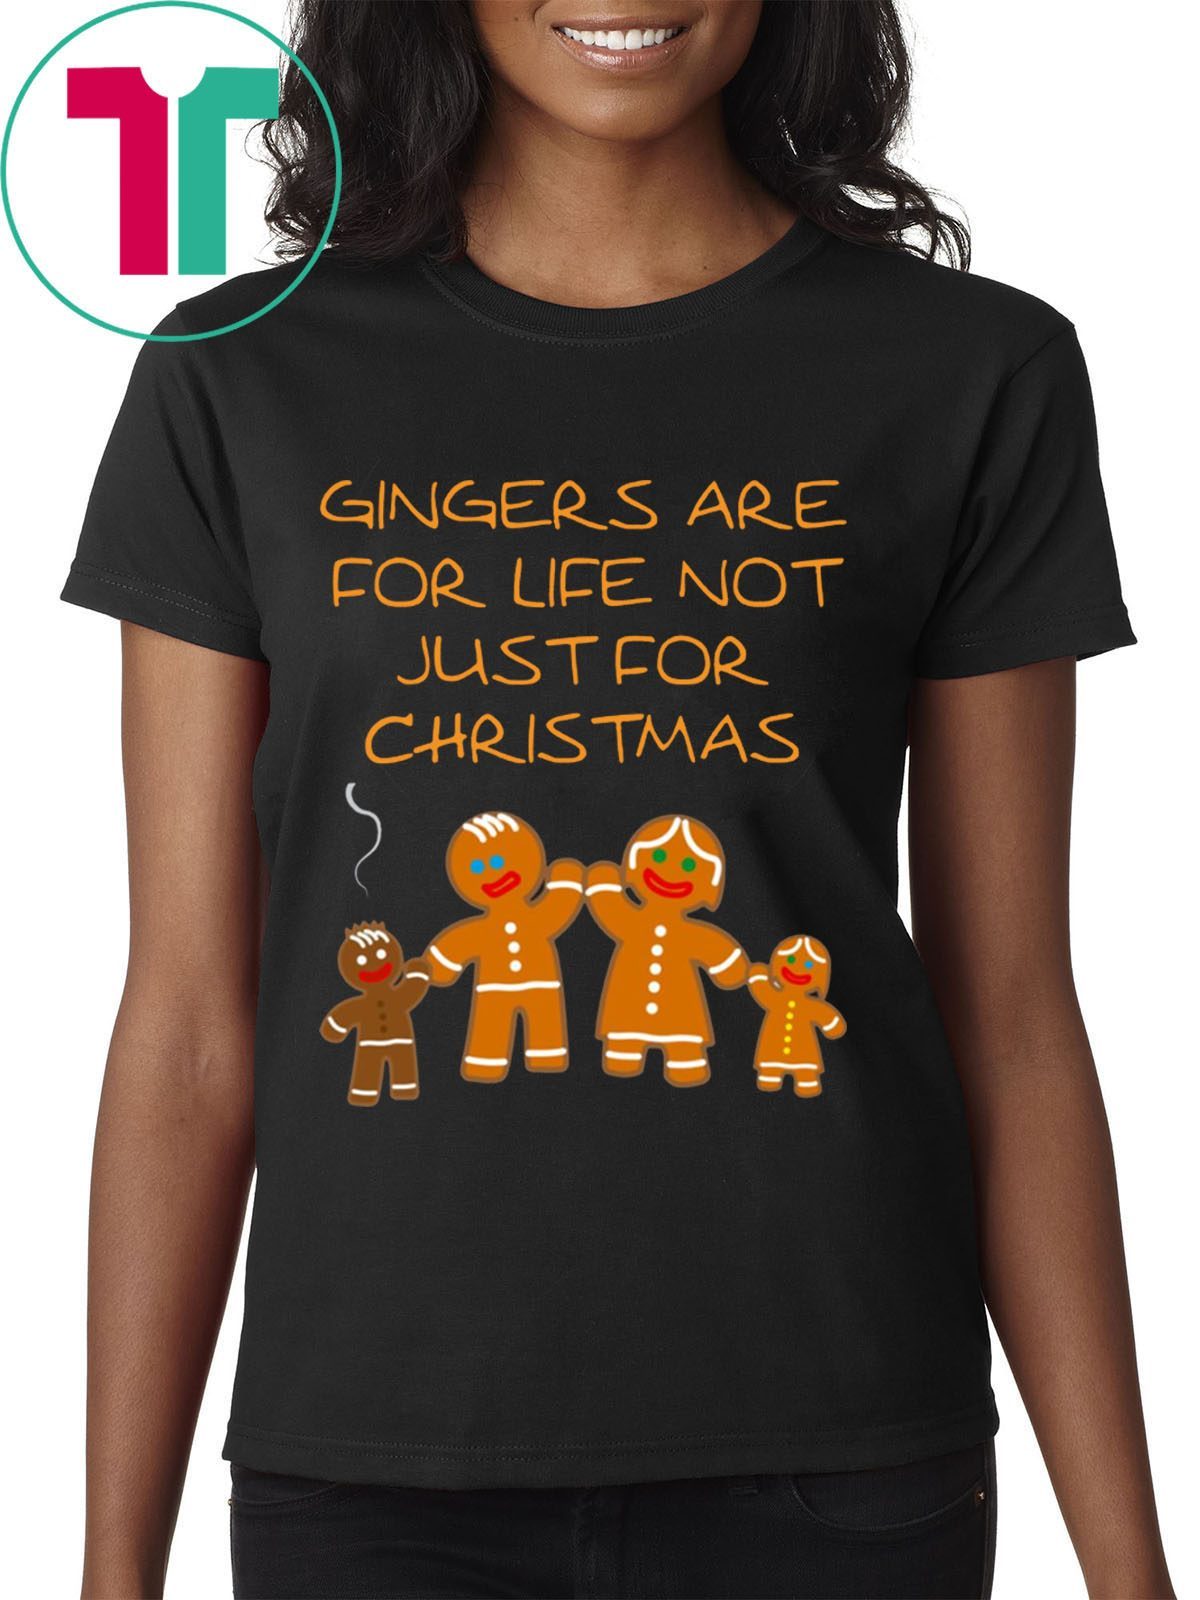 Gingers are for life not just for Christmas TShirt